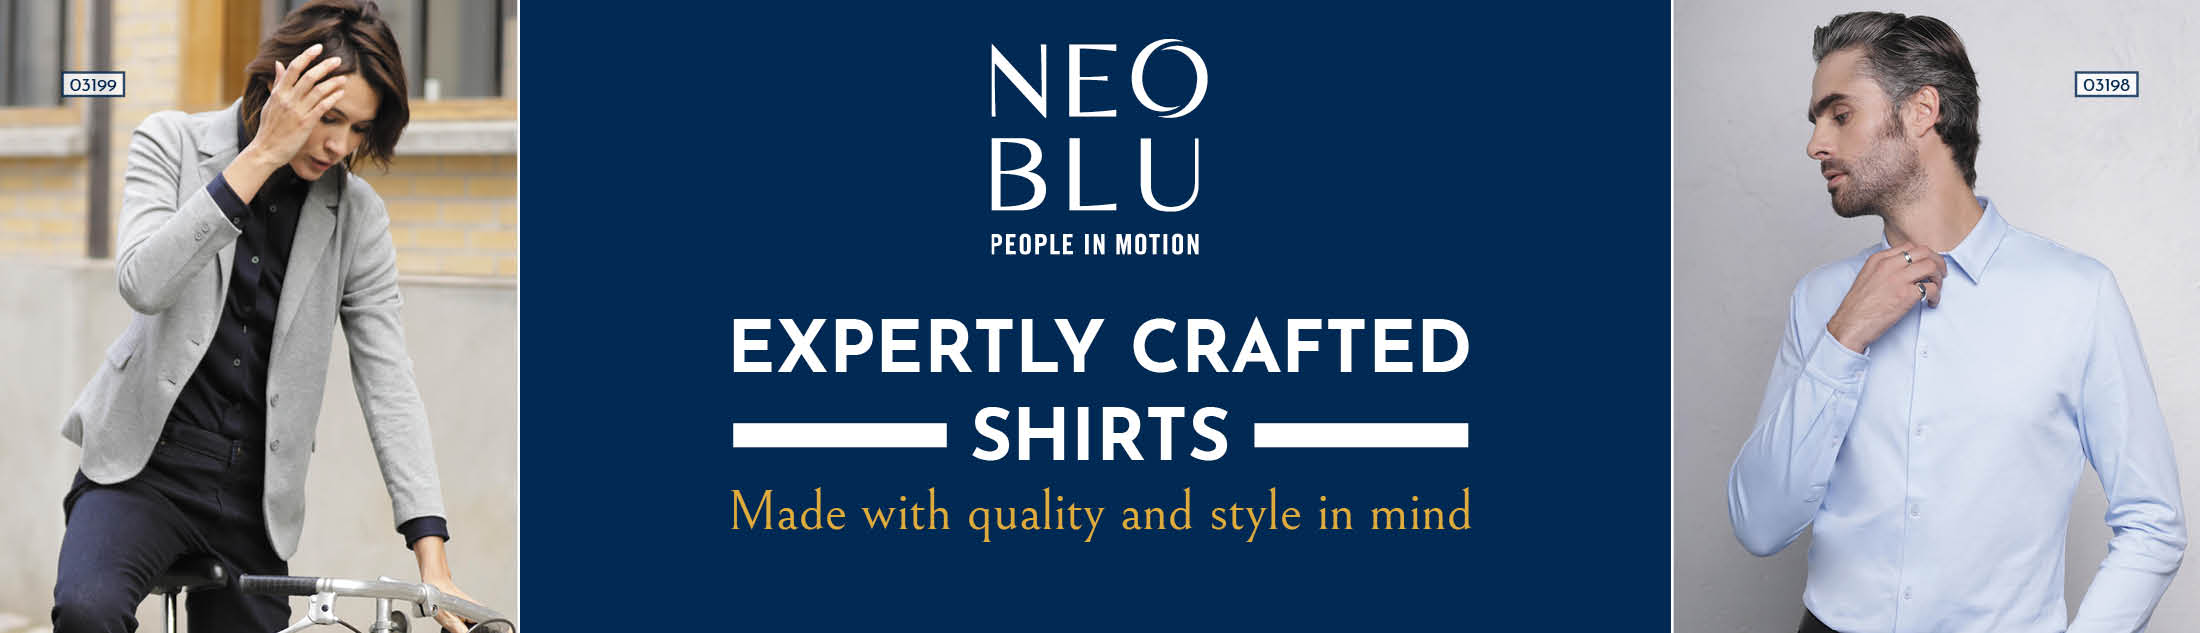 Exceptional quality from NEOBLU